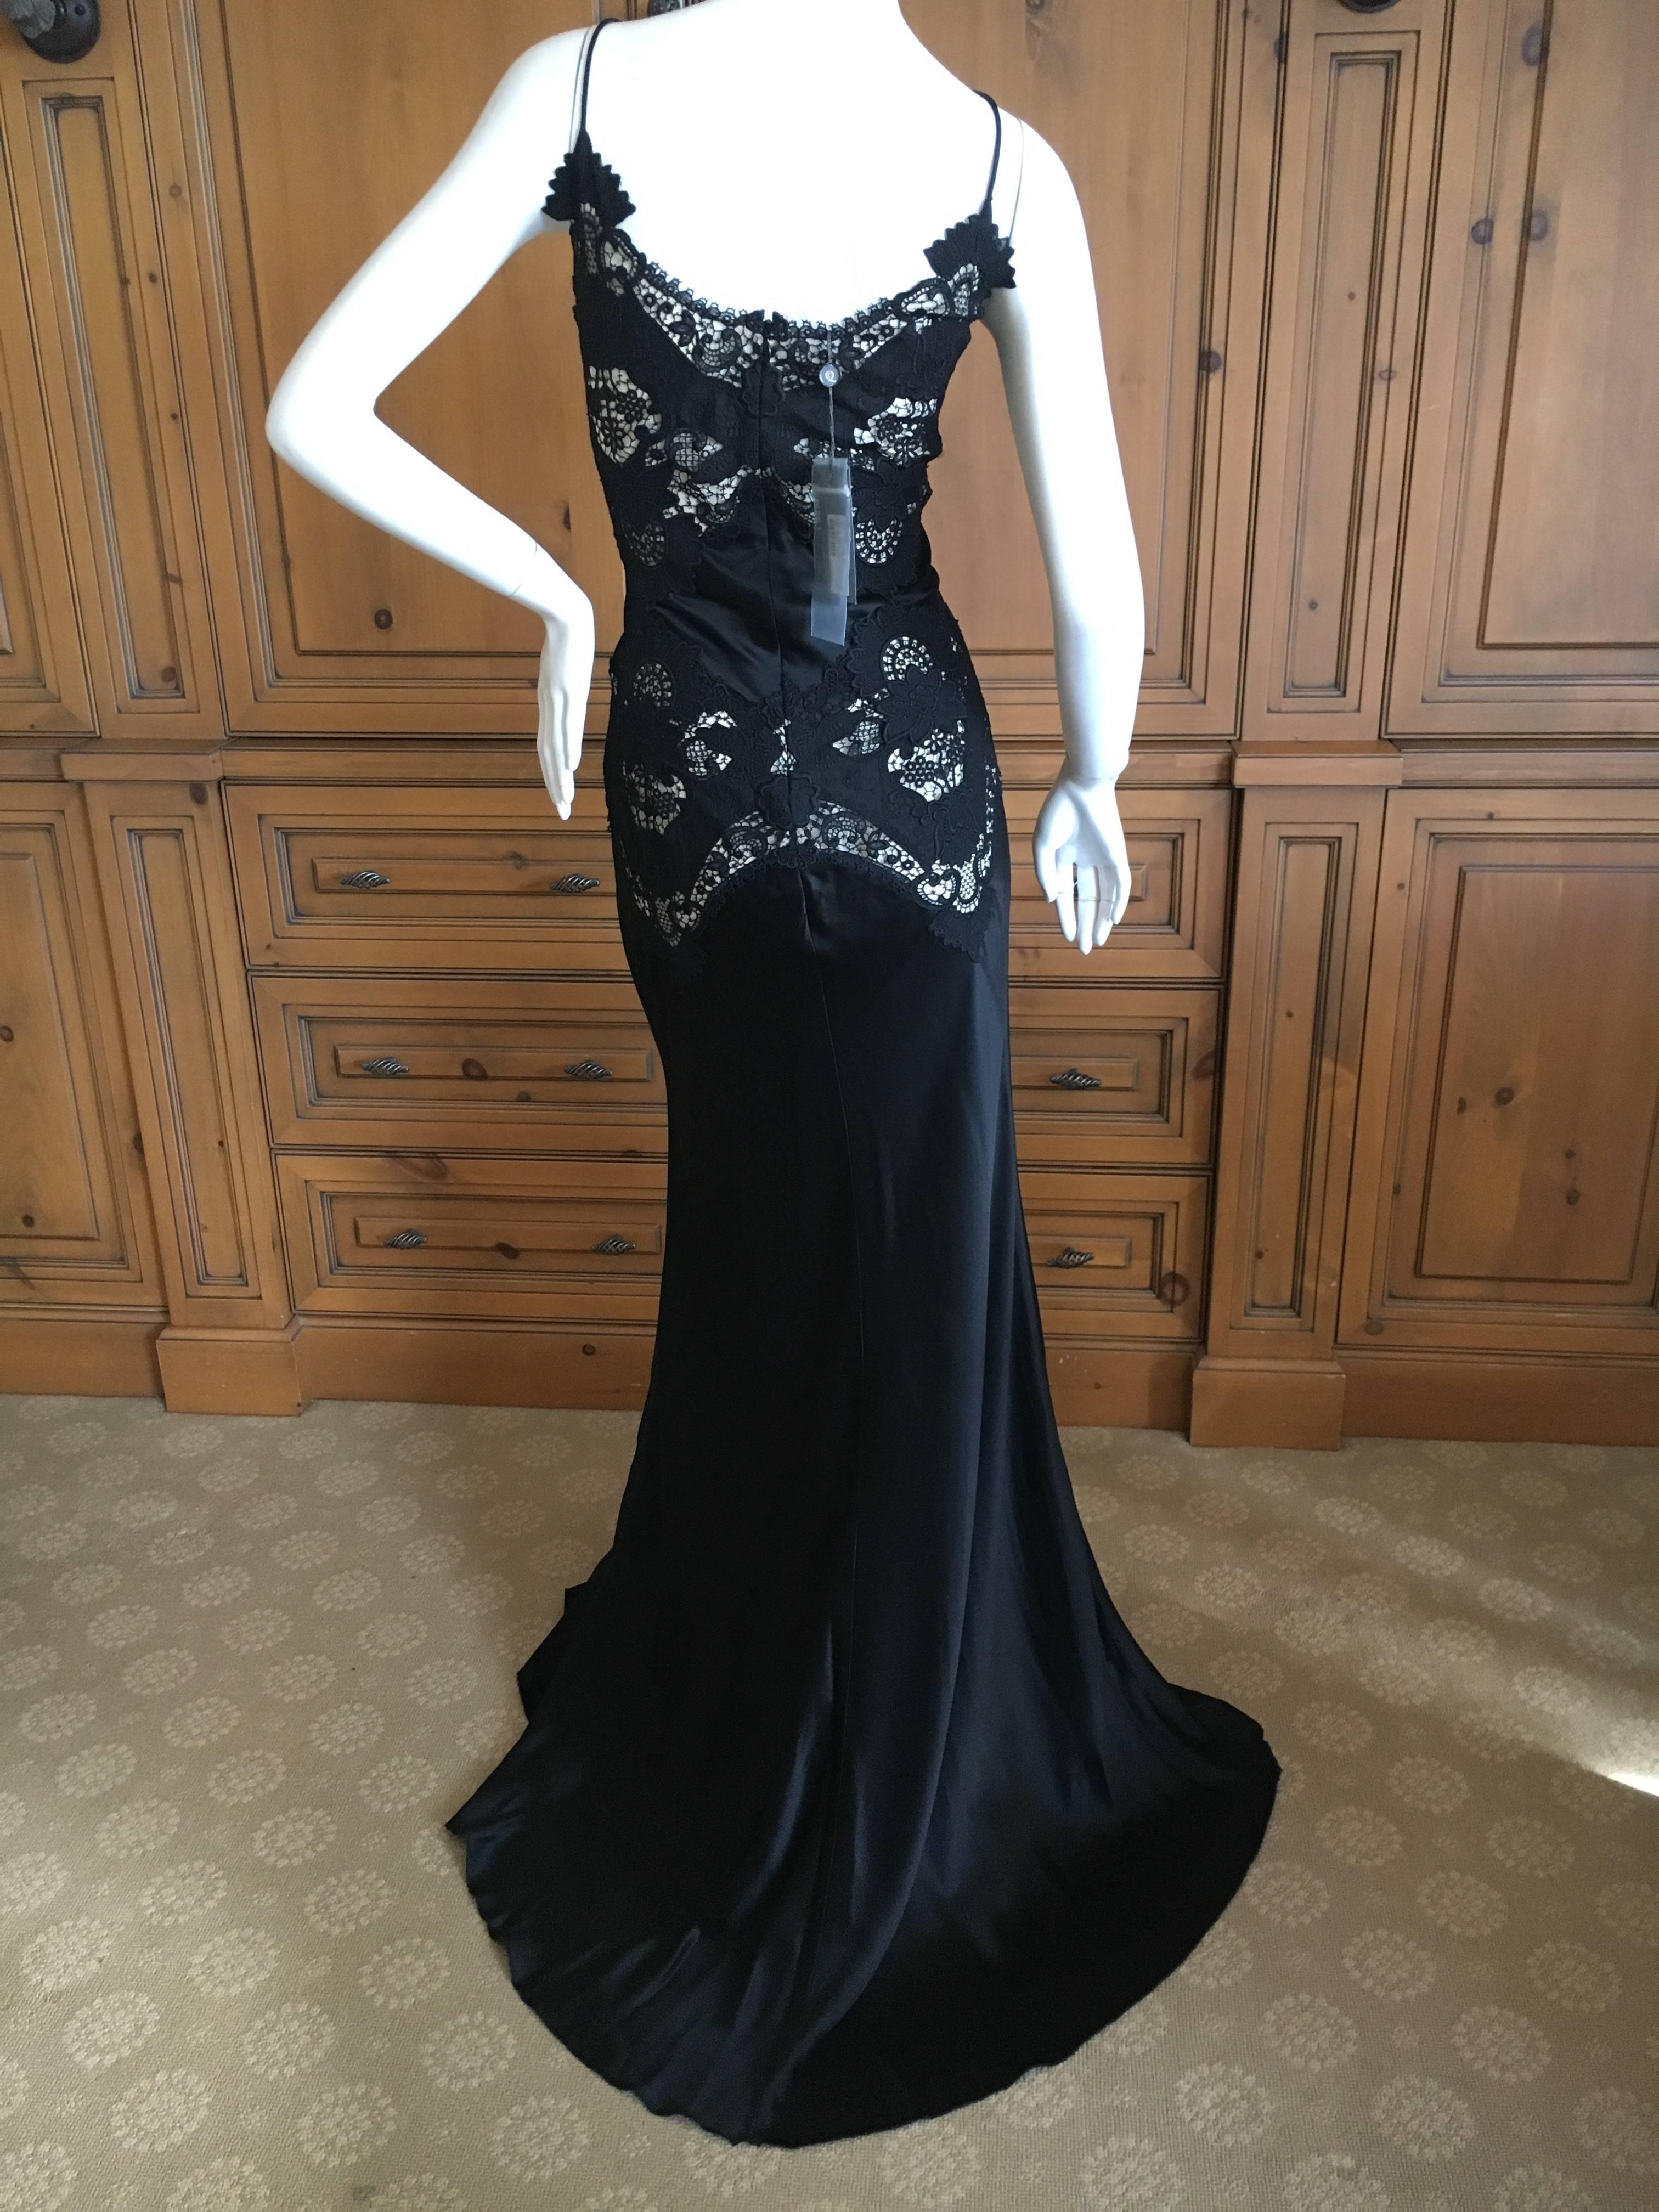 Alexander McQueen Black Evening Dress with Sheer Guipure Lace Details 2004 Sz 46 For Sale 4